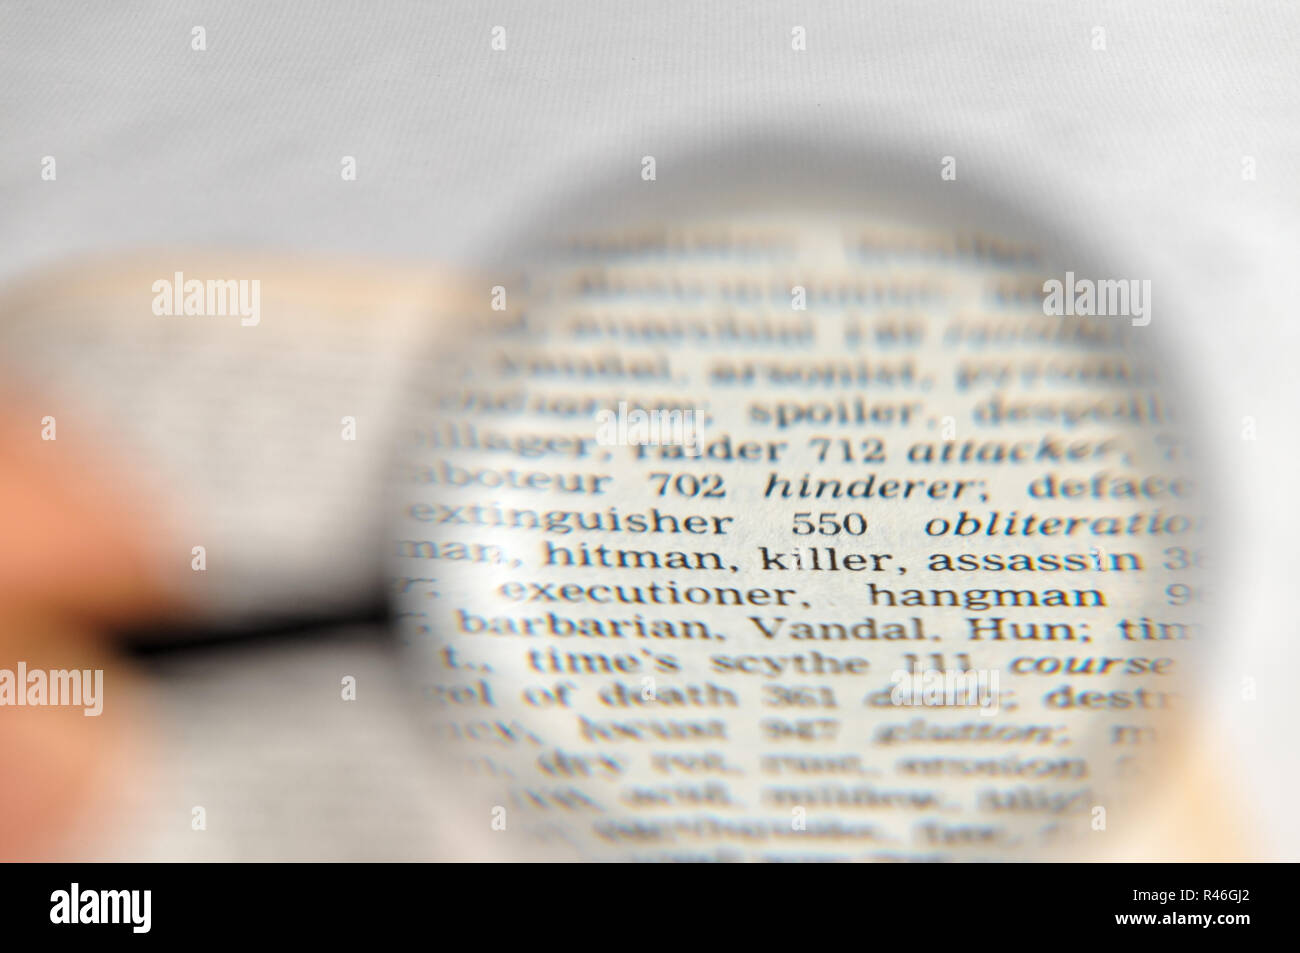 Hitman, killer and assassin words magnified on book Stock Photo